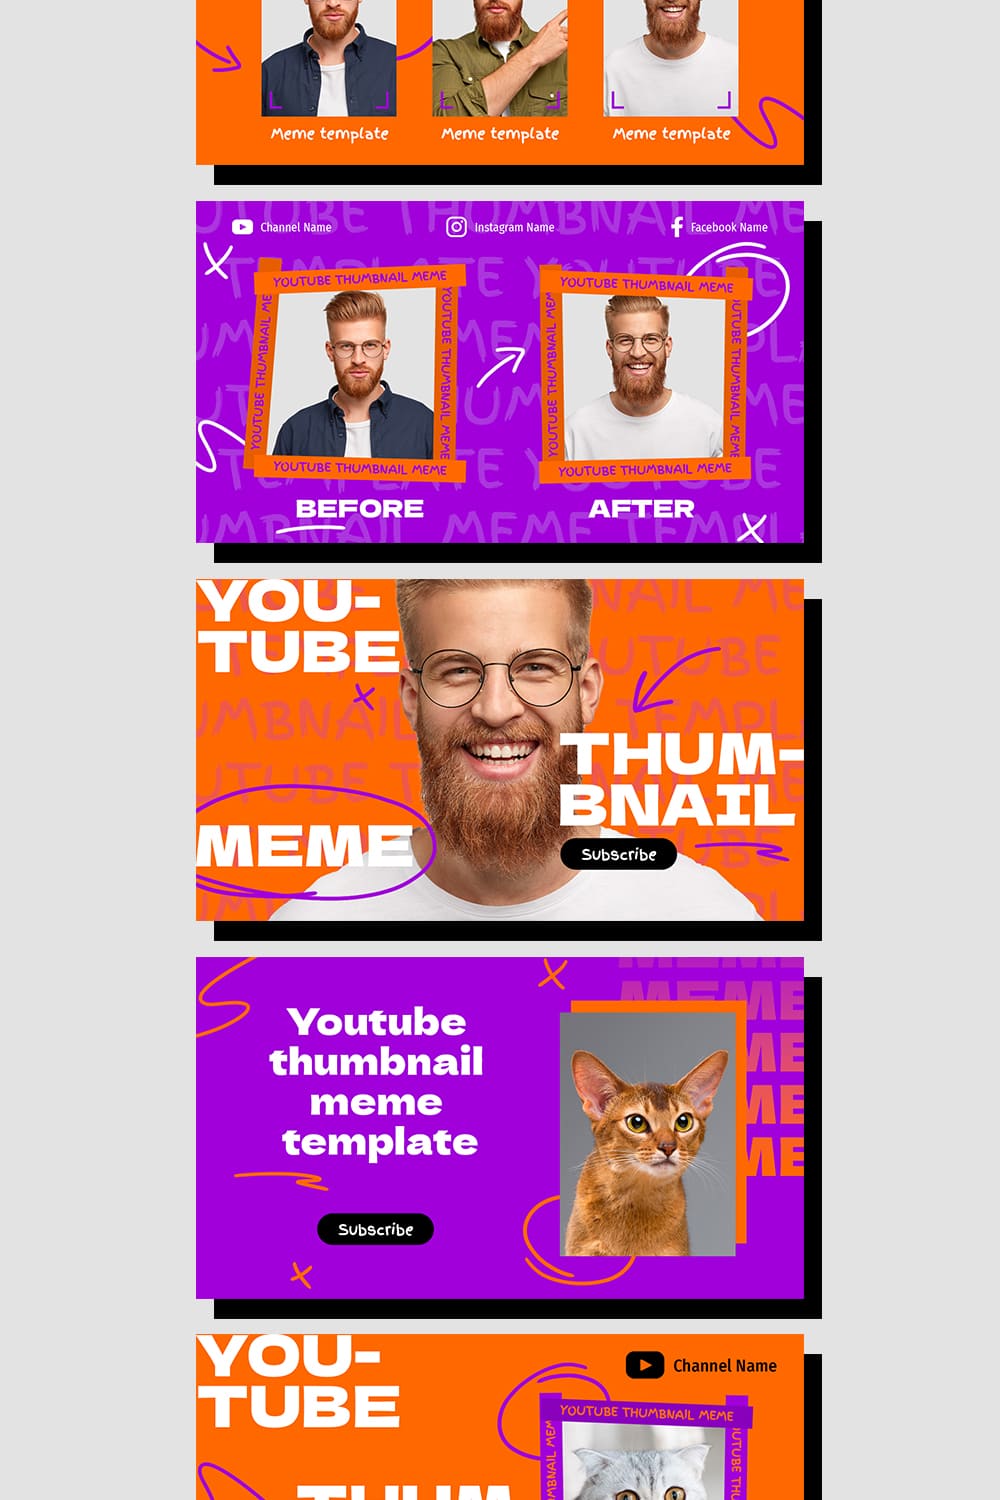 So colorful template for modern and creative youtube channel.